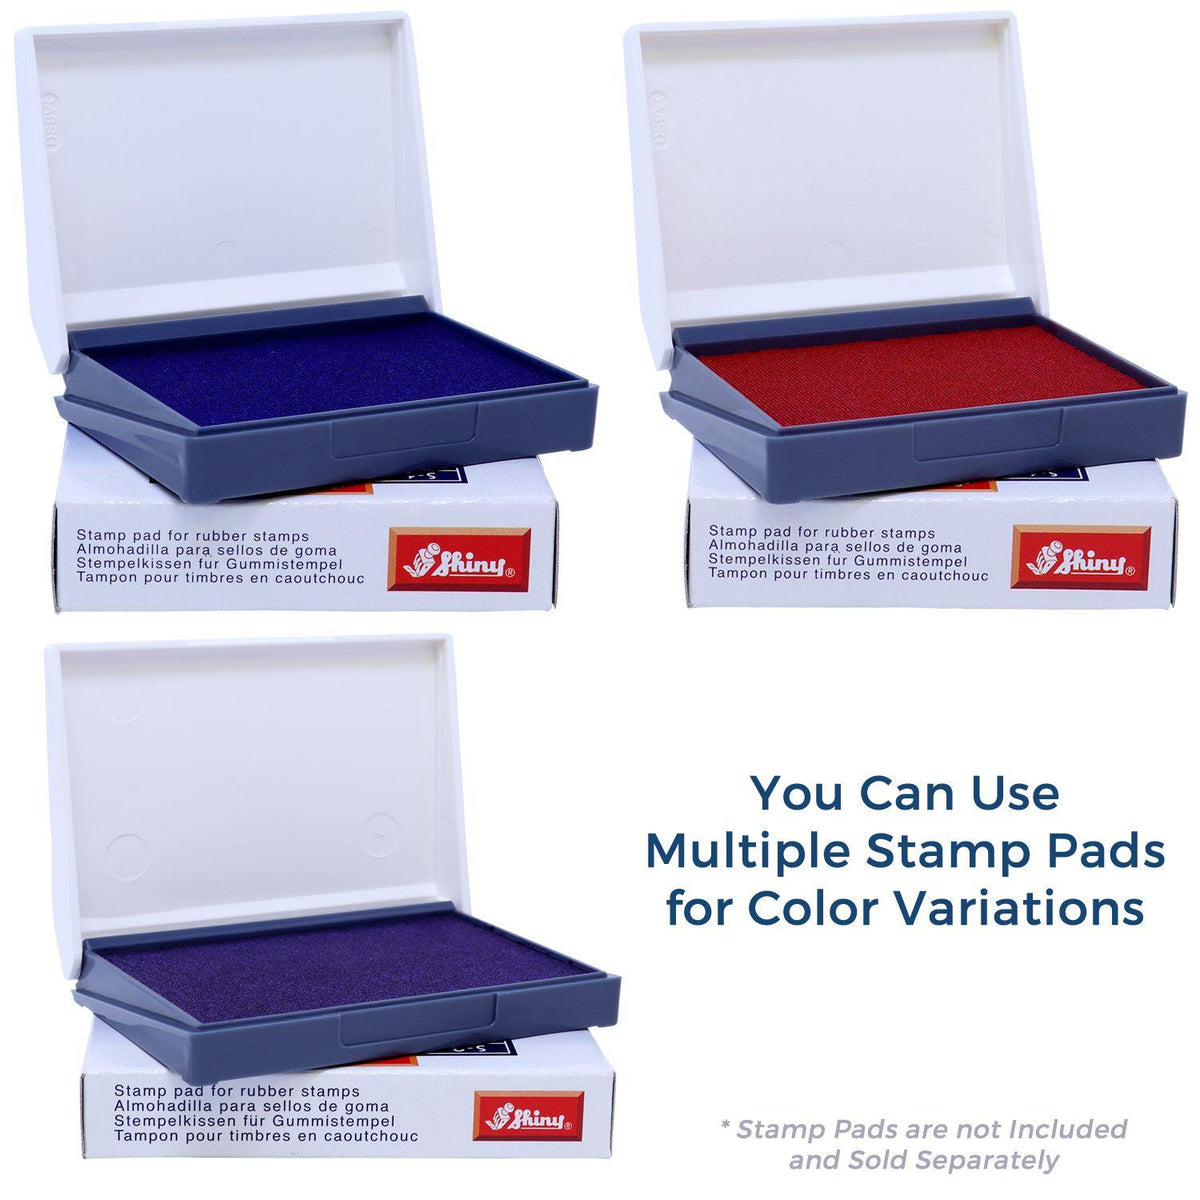 Stamp Pads for Large Secure Rubber Stamp Available